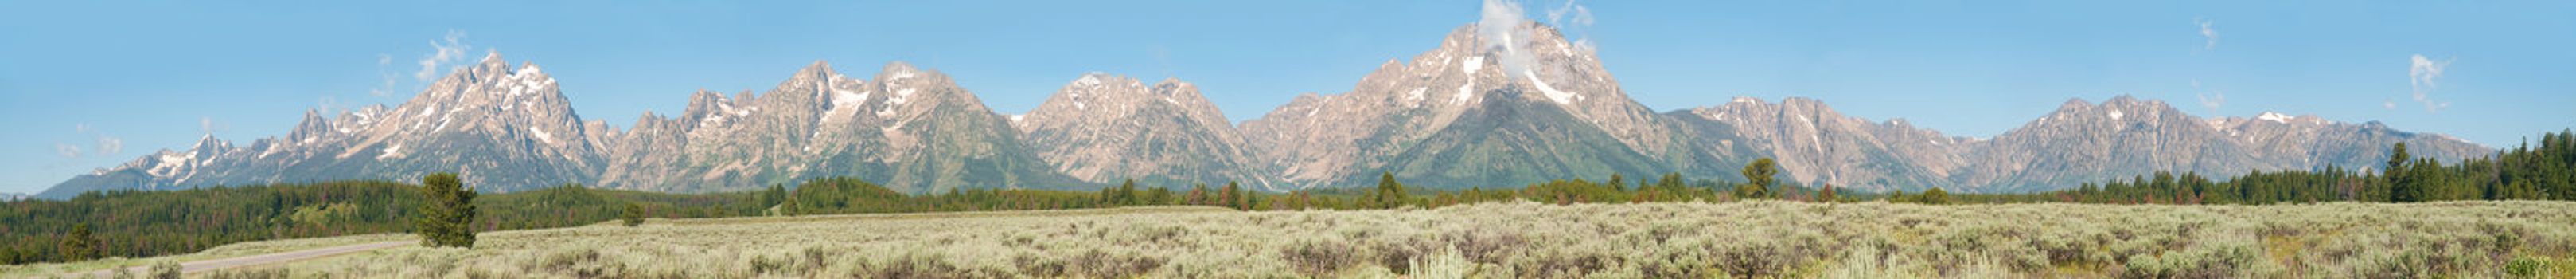 panoramic view of the Grand Tetons in Wyoming